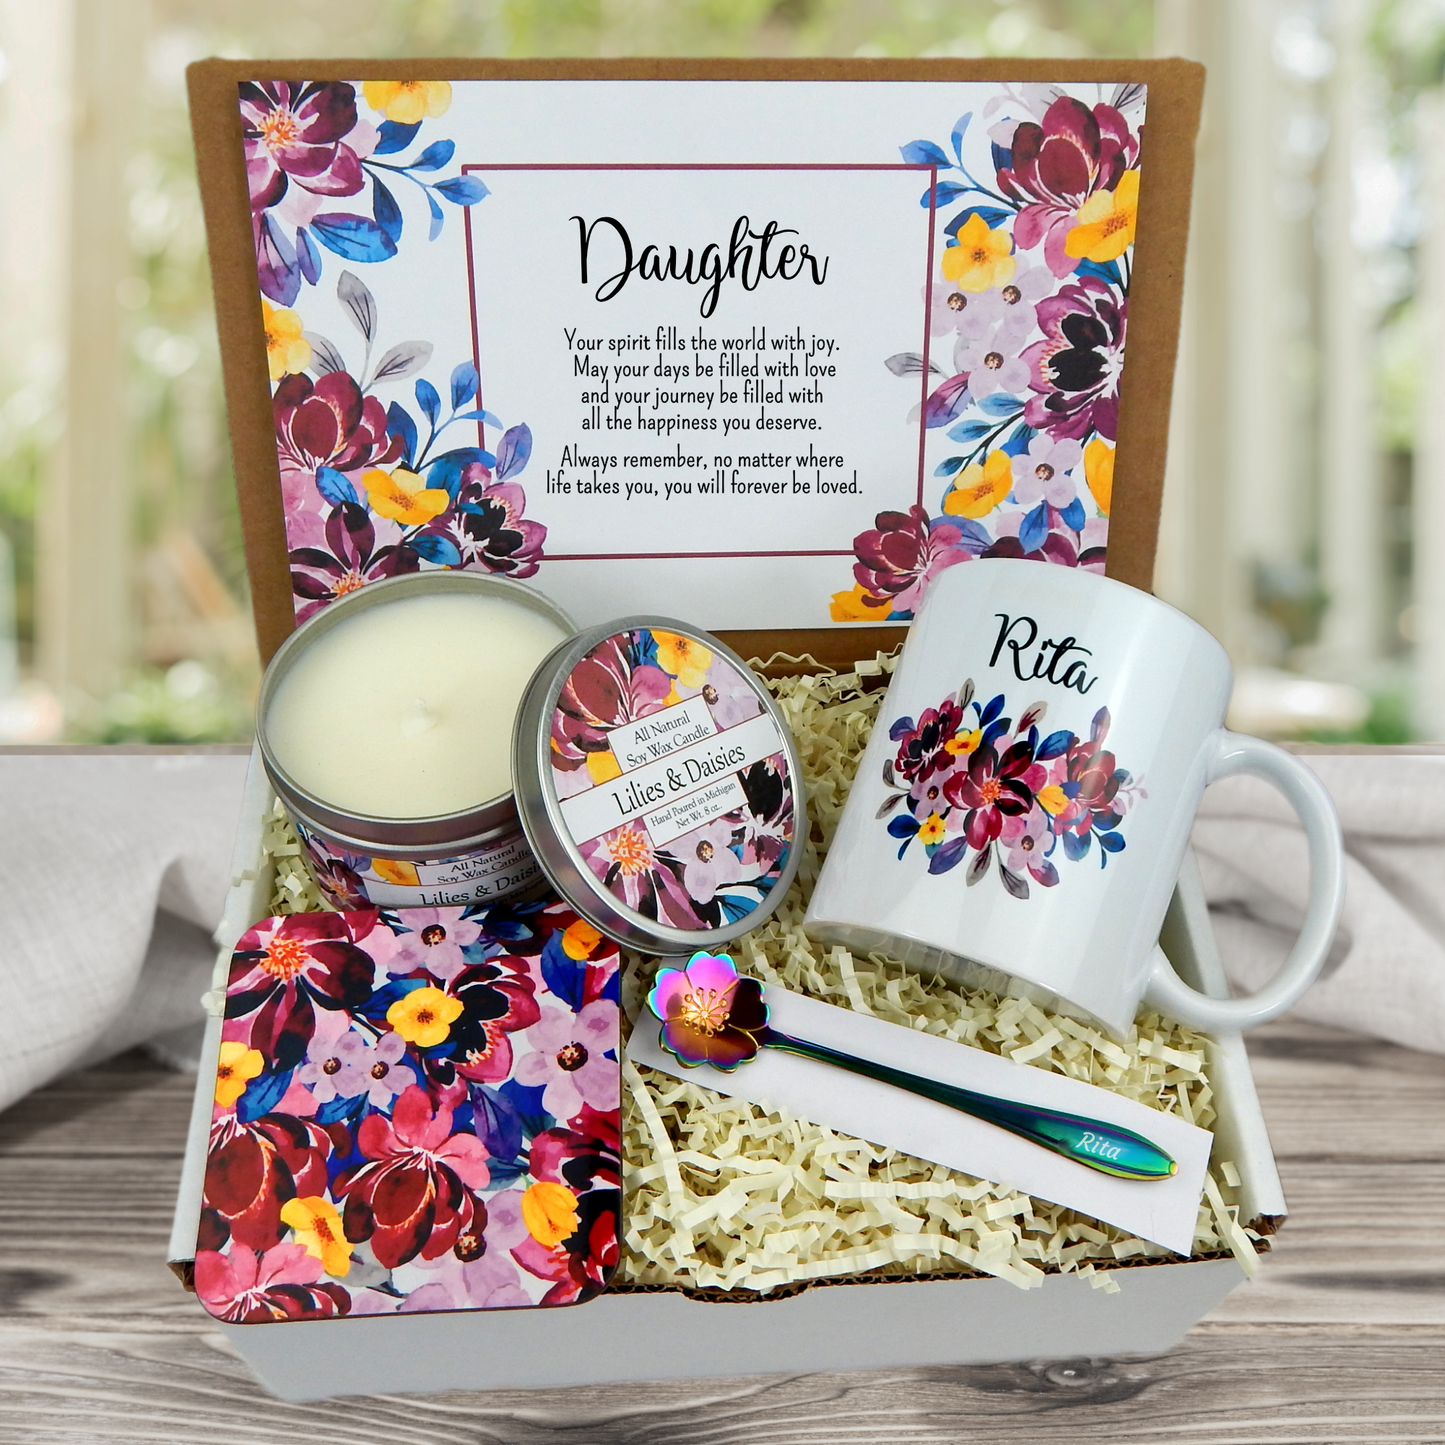 Personalized Gift for Daughter - Engraved Daughter Gift Basket